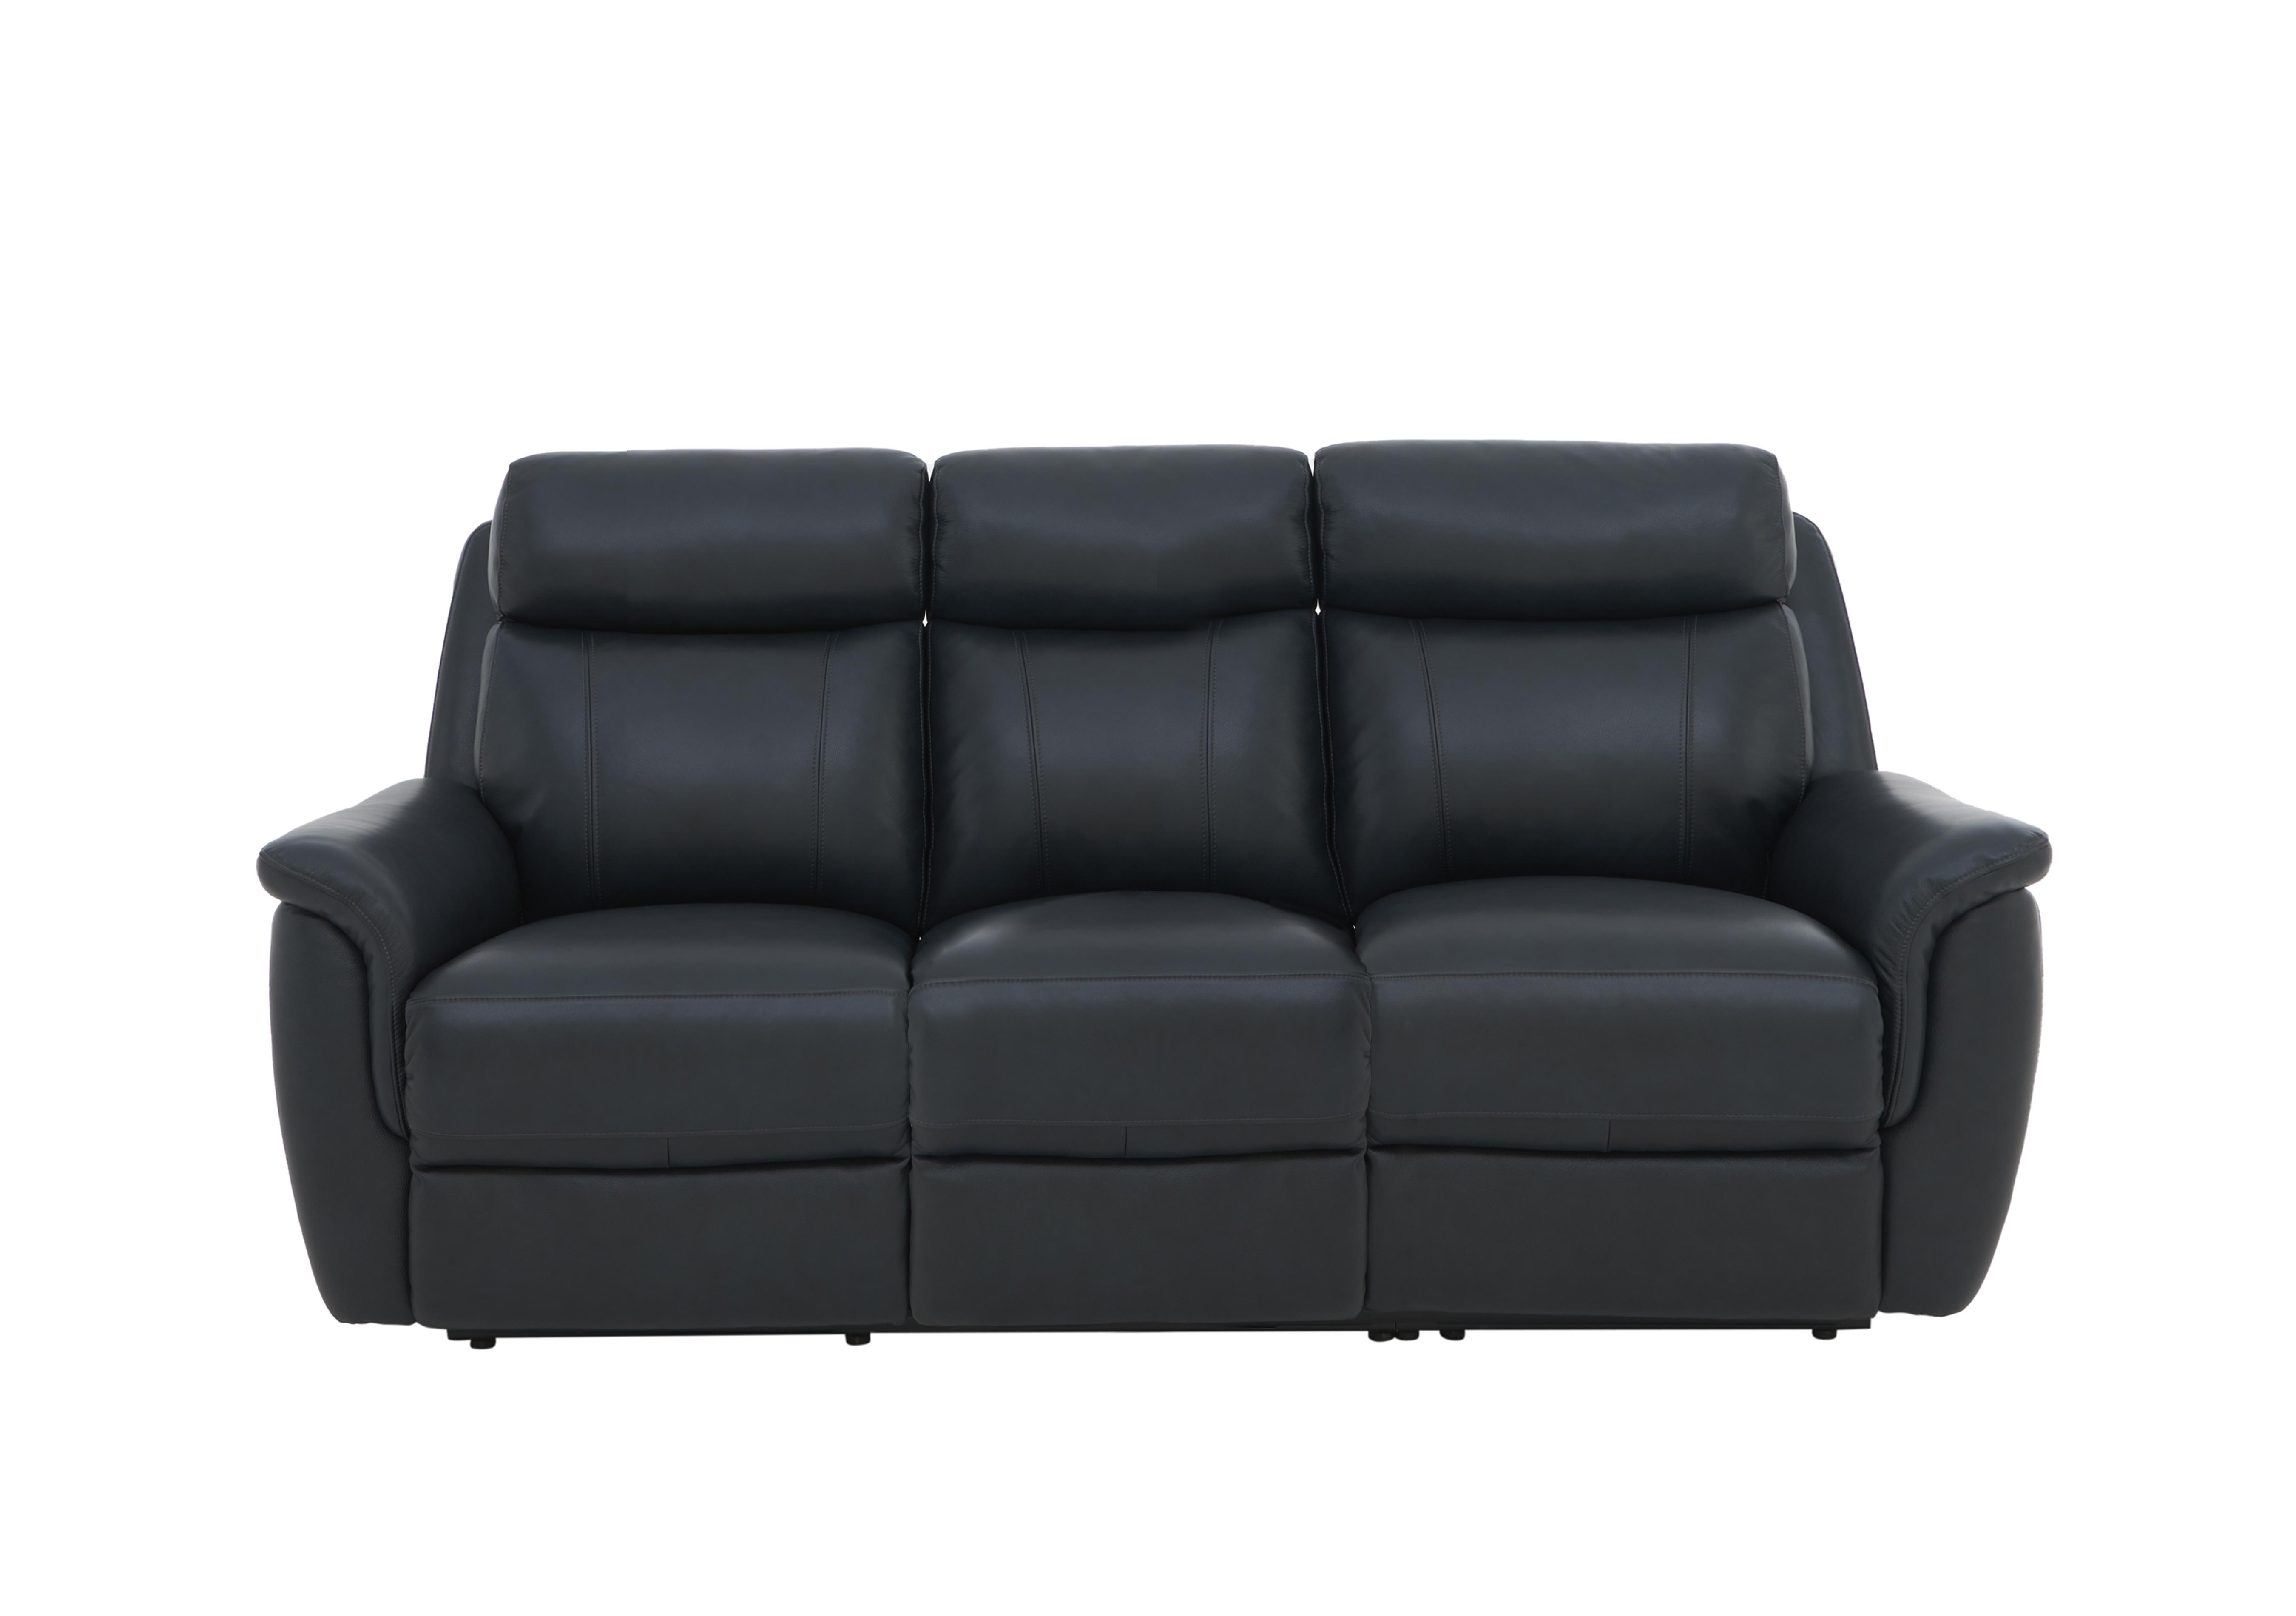 Orlando 3 Seater Leather Power Recliner Sofa with Power Headrests in 60/24 Navy on Furniture Village